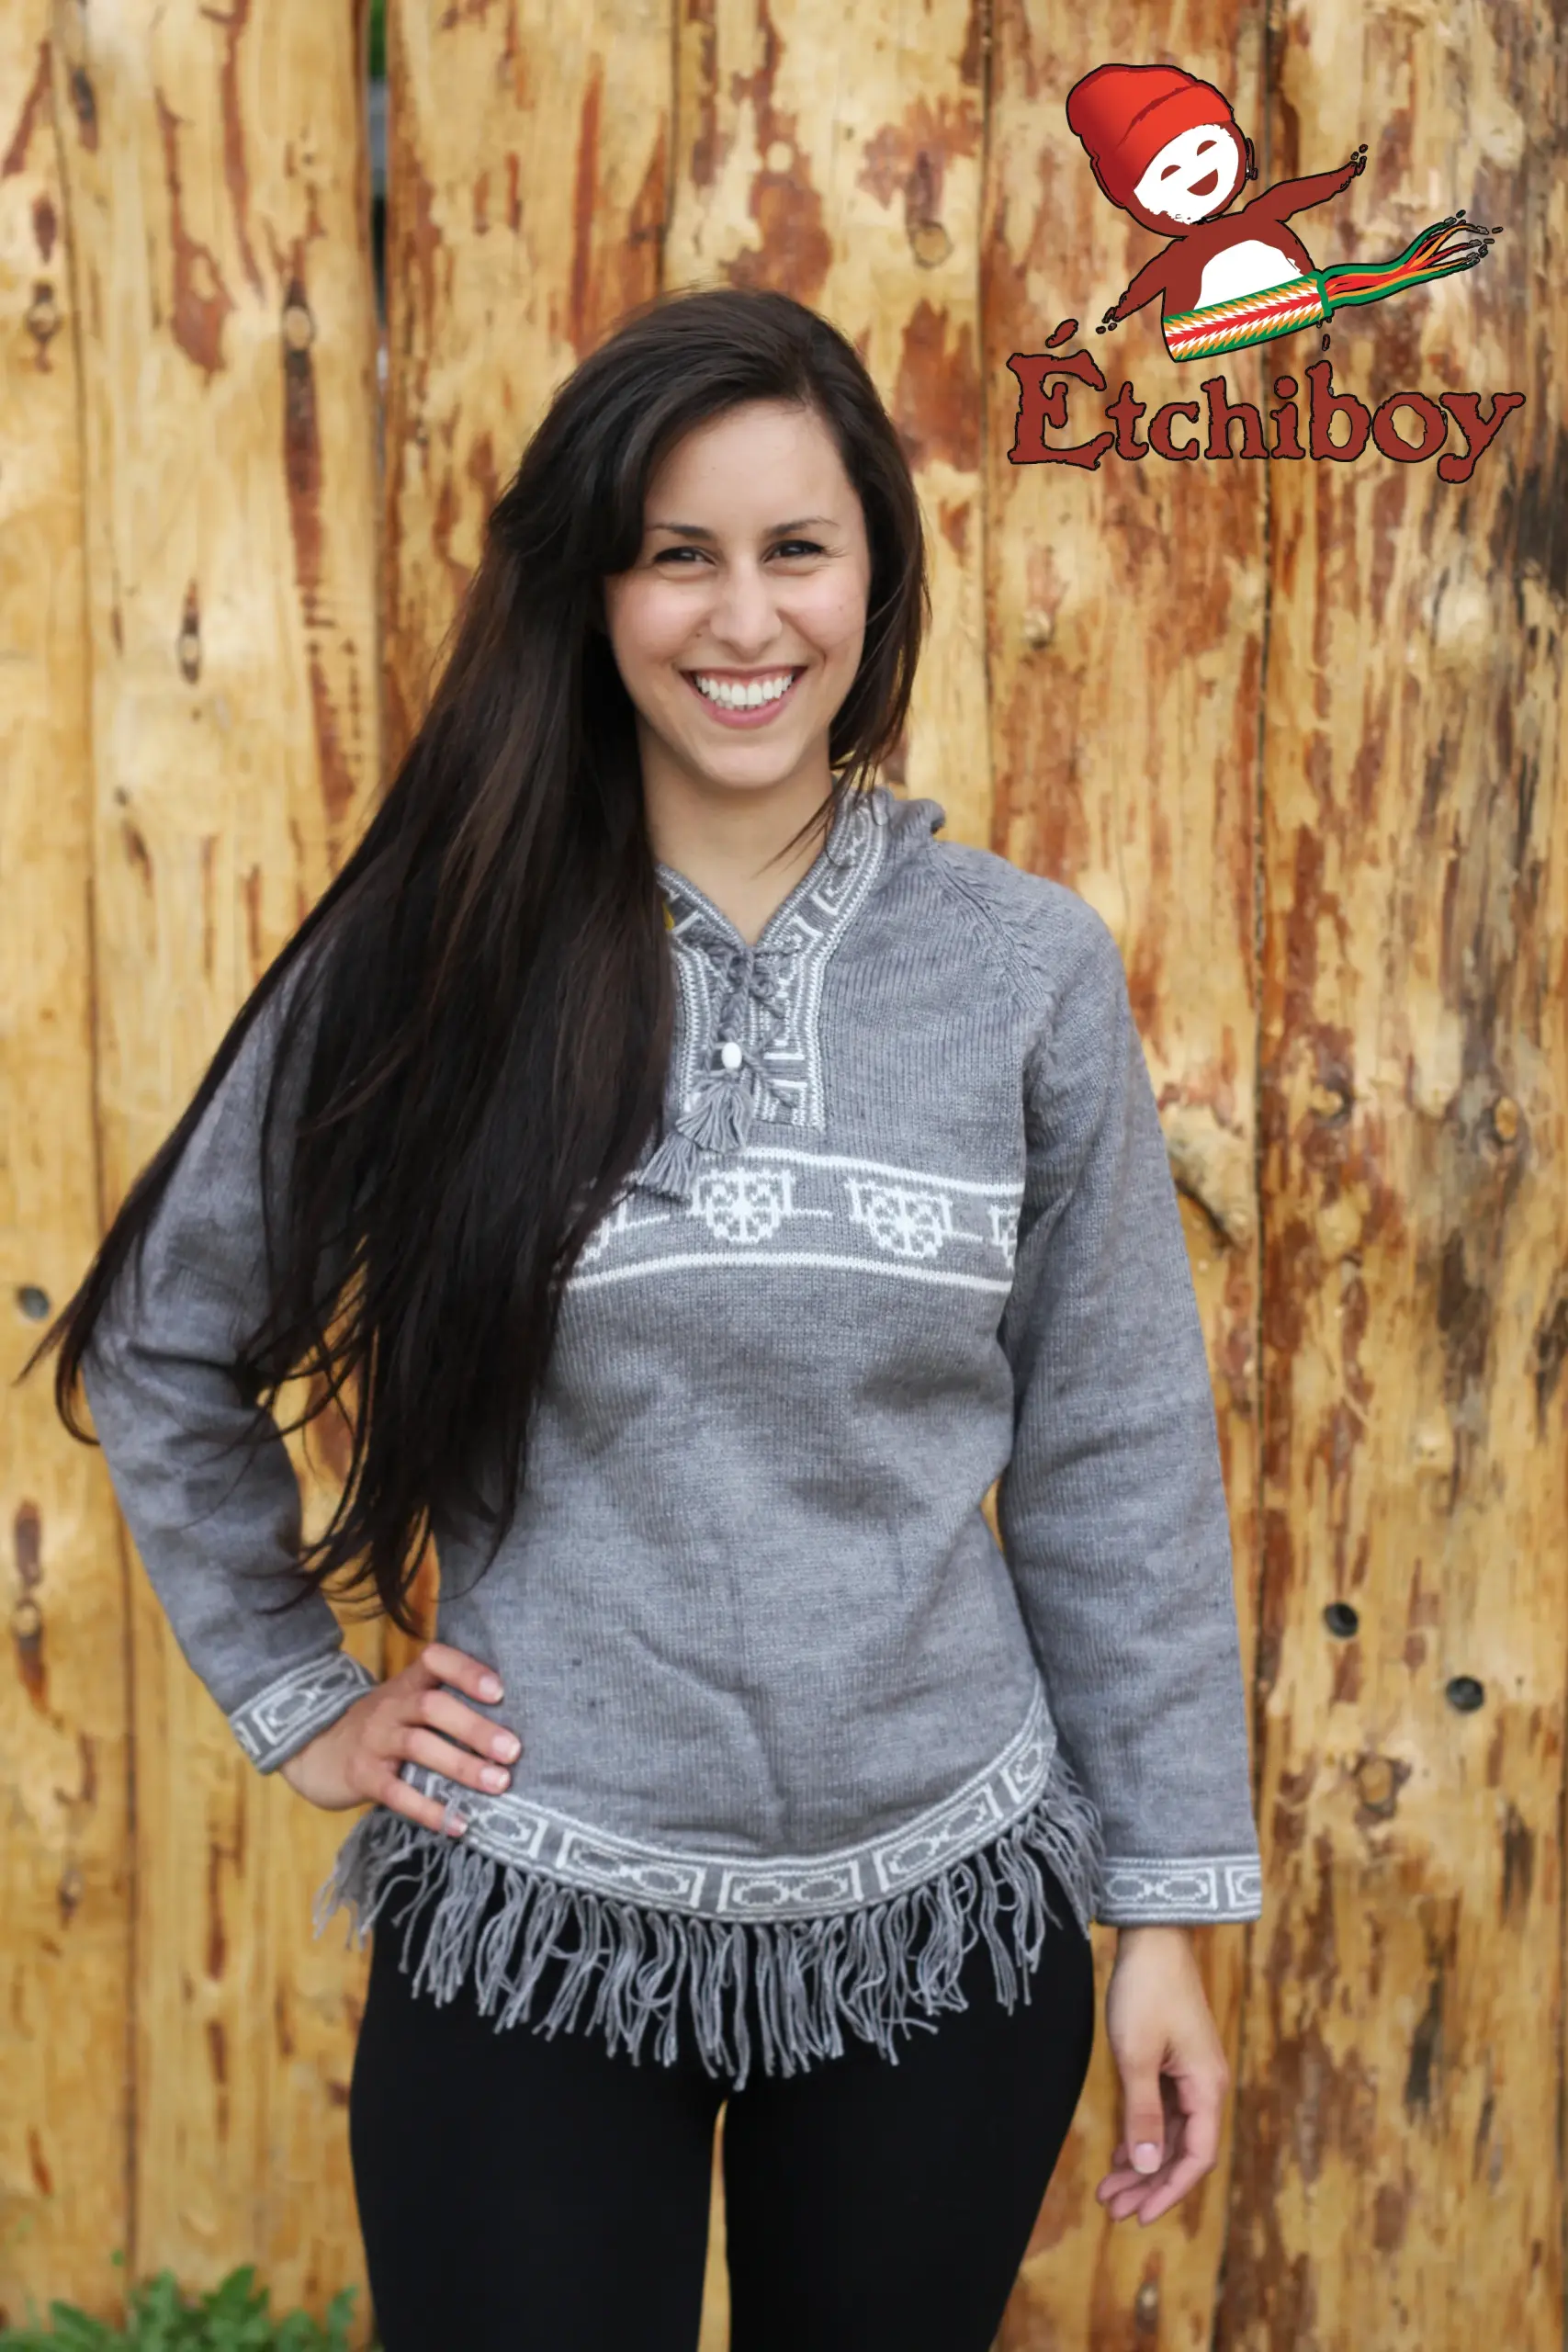 Hooded Grey Sweater With Red River Cart Chandail Gris Avec Capuchon Avec Charrette